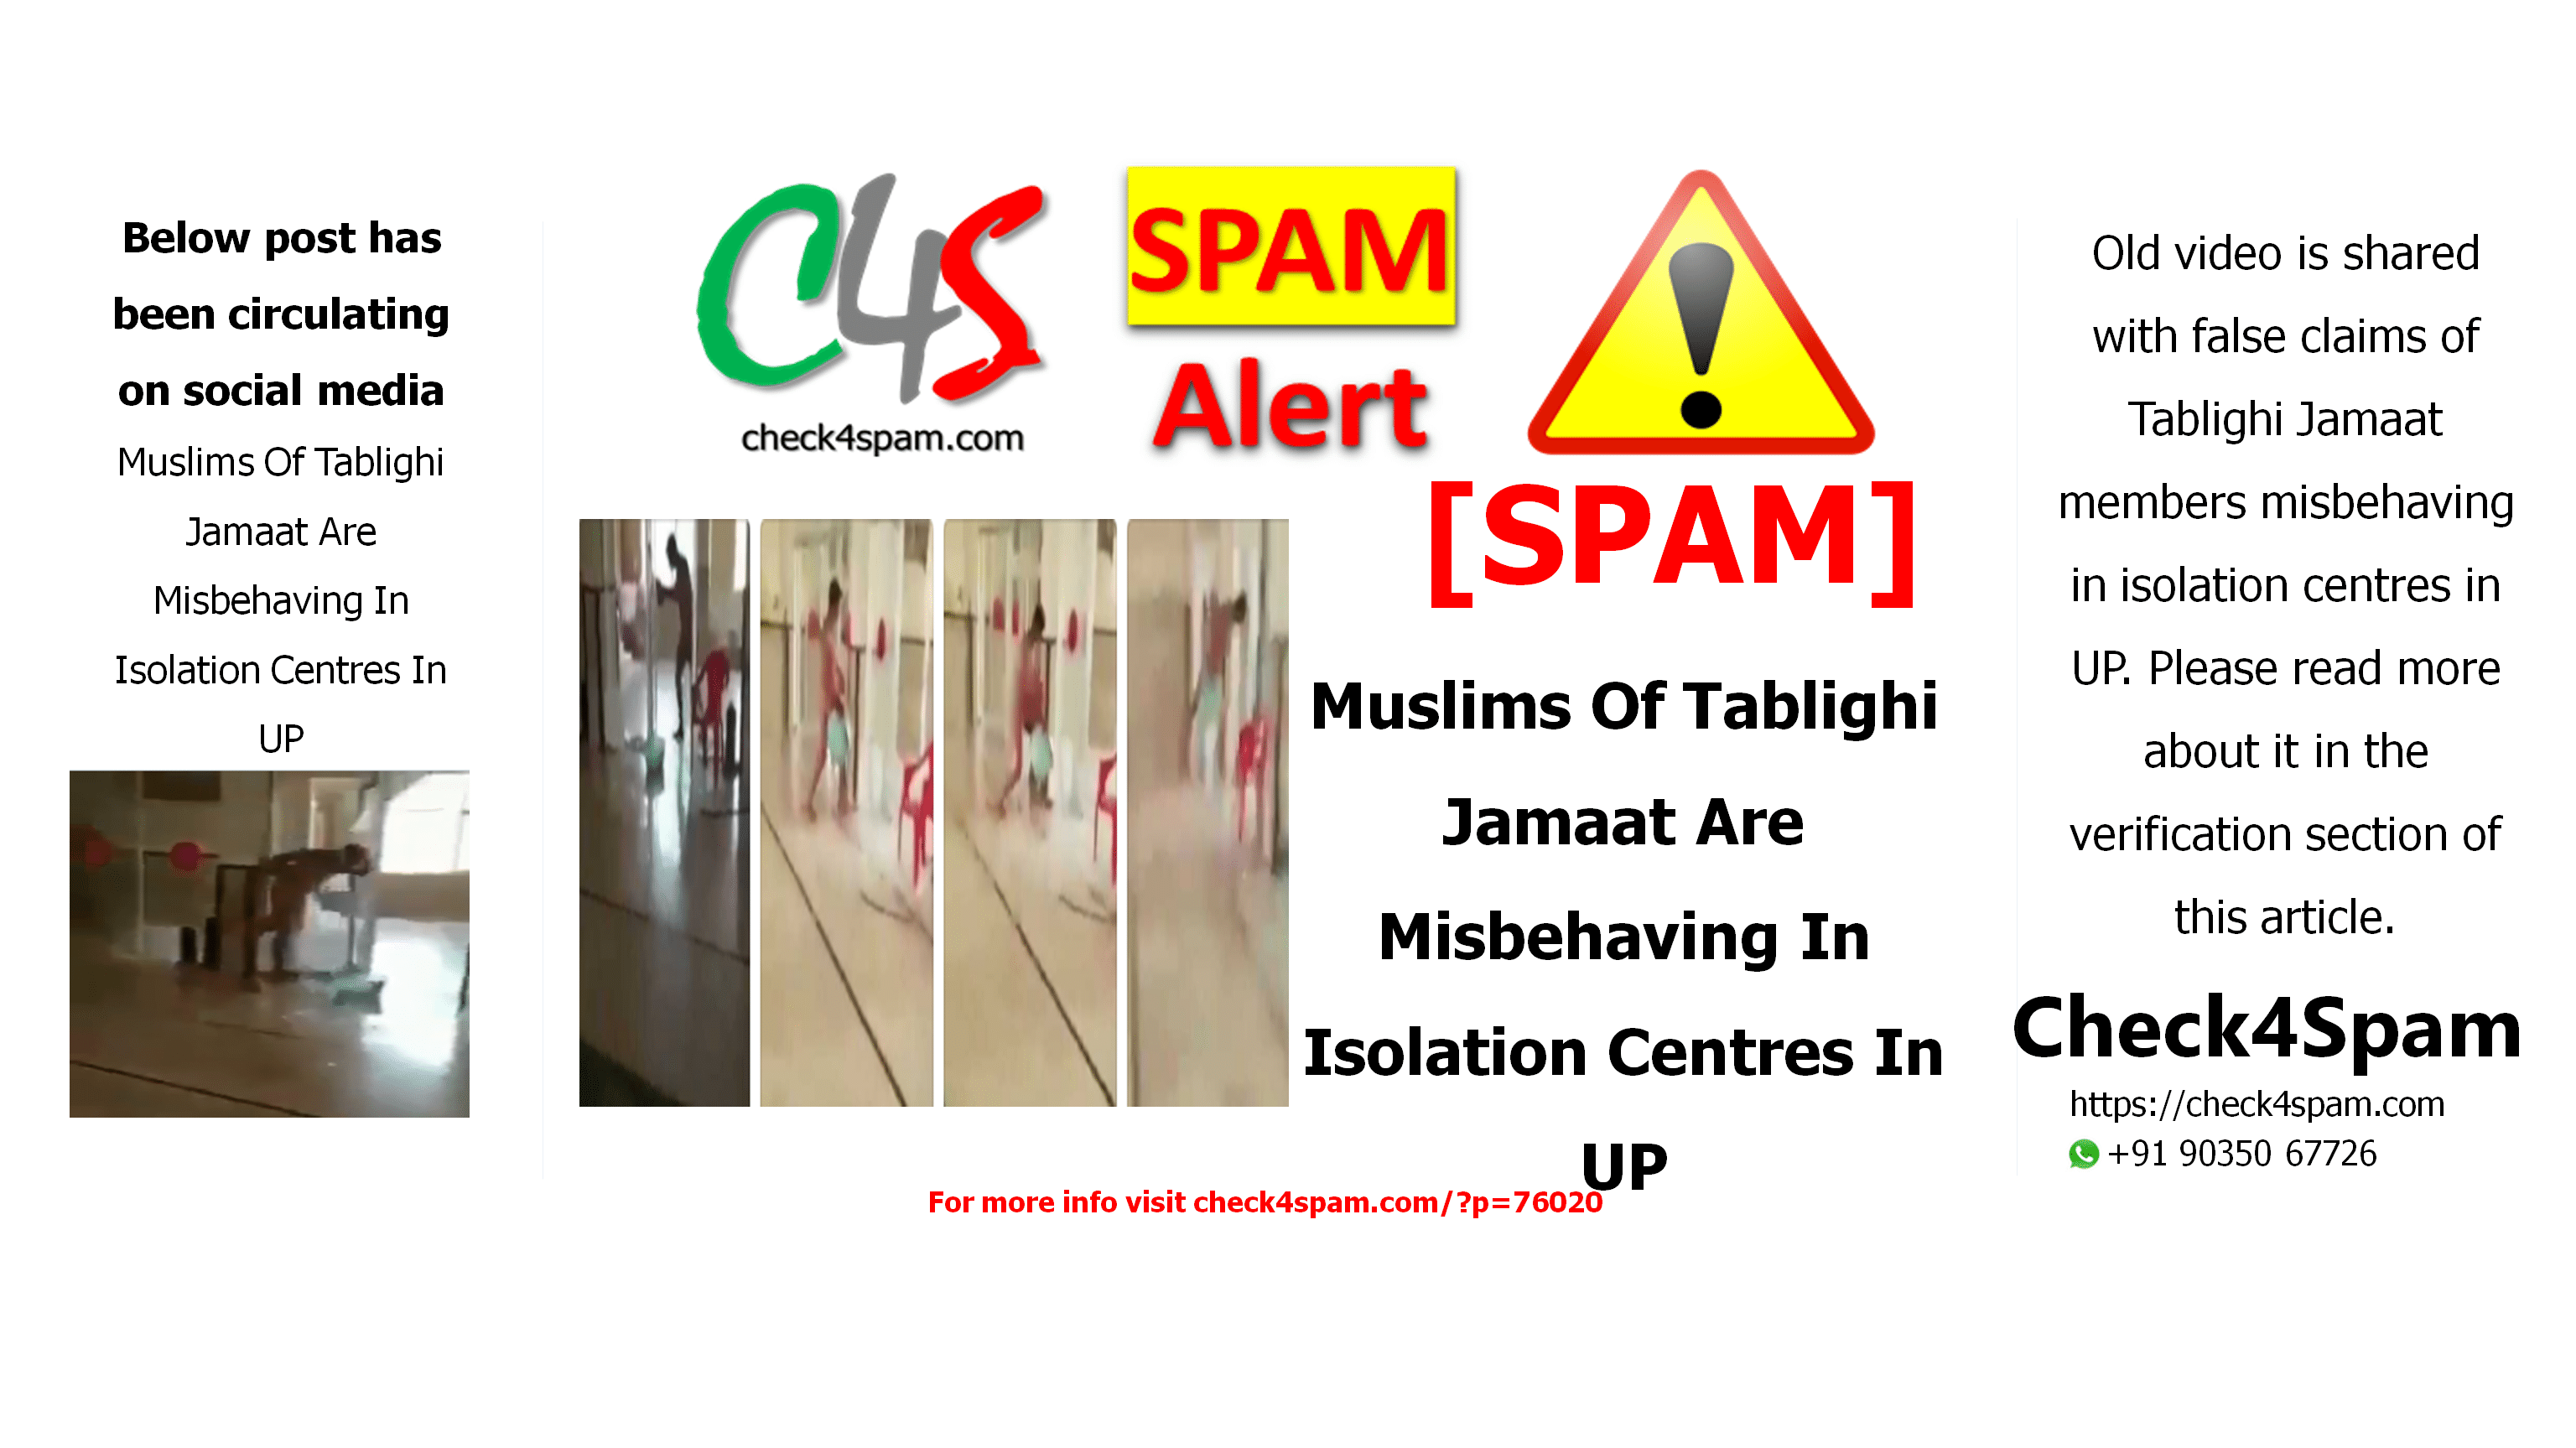 Muslims Of Tablighi Jamaat Are Misbehaving In Isolation Centres In UP